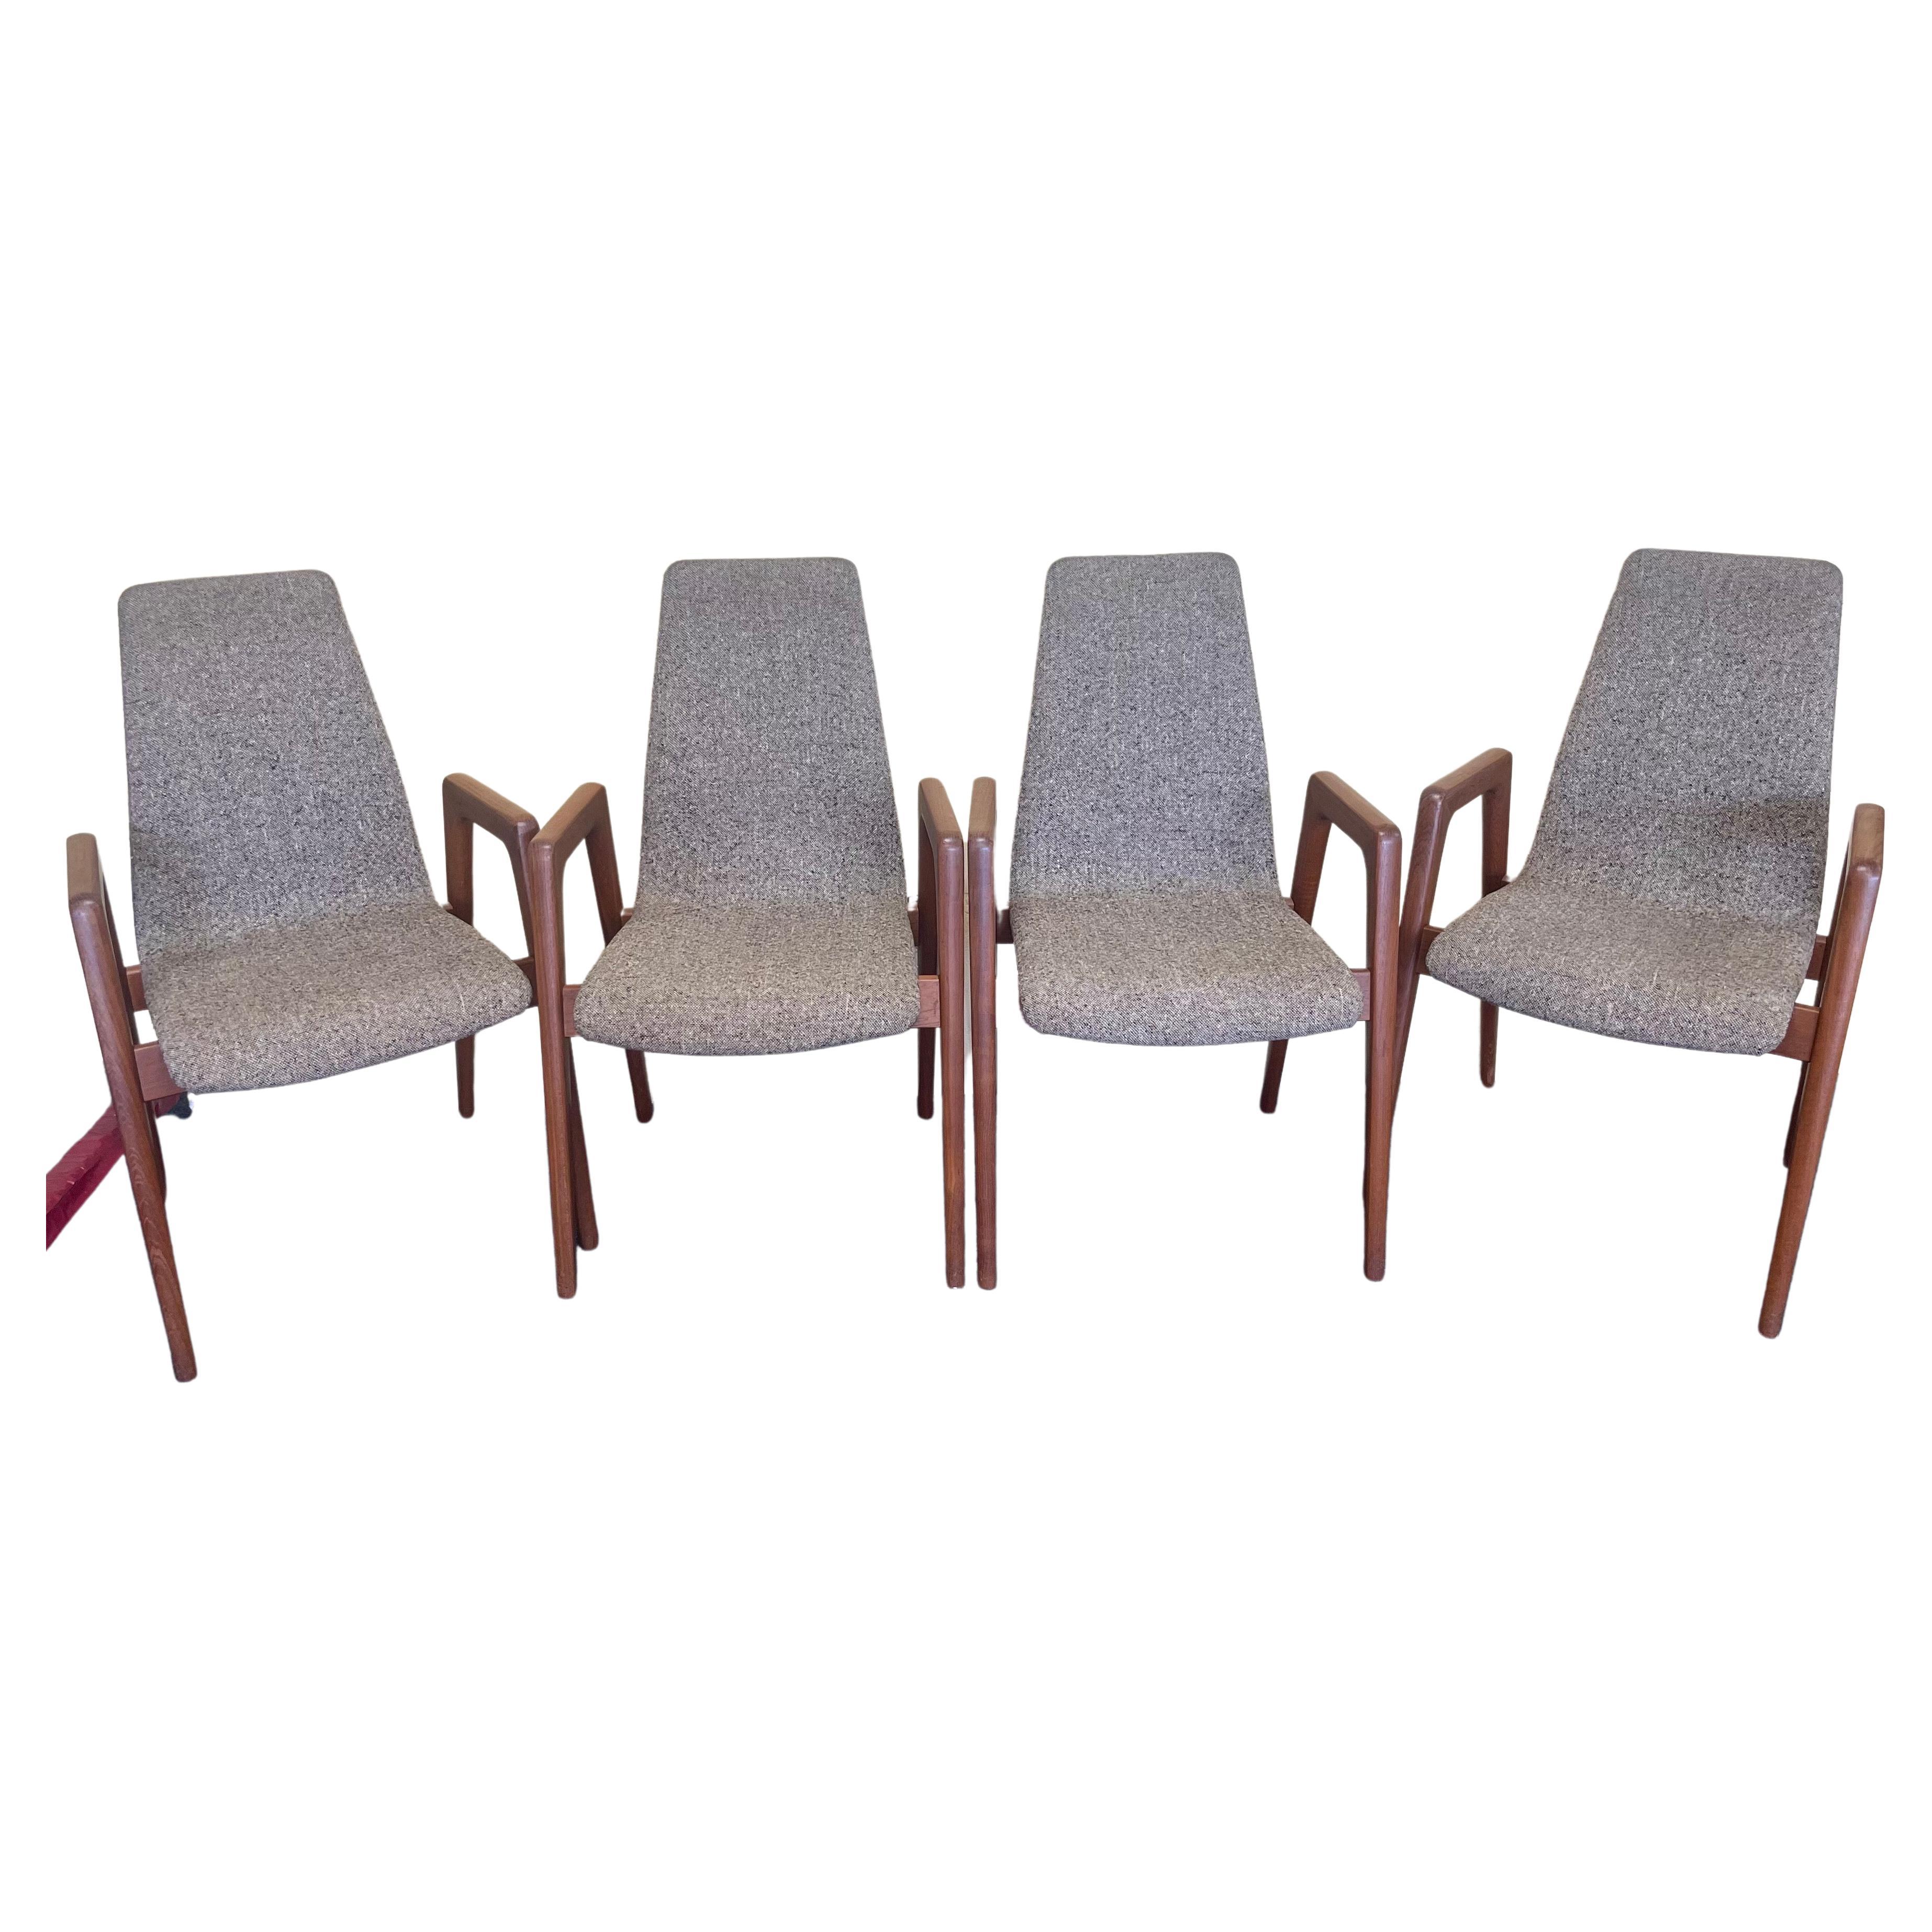 A very rare set of four Danish modern solid teak dining chairs by Kai Kristiansen for V. Shou Andersen of Denmark, circa 1960s. I have not been able to locate a similair set of chairs online; we beleive they are quite rare with both an upholstered